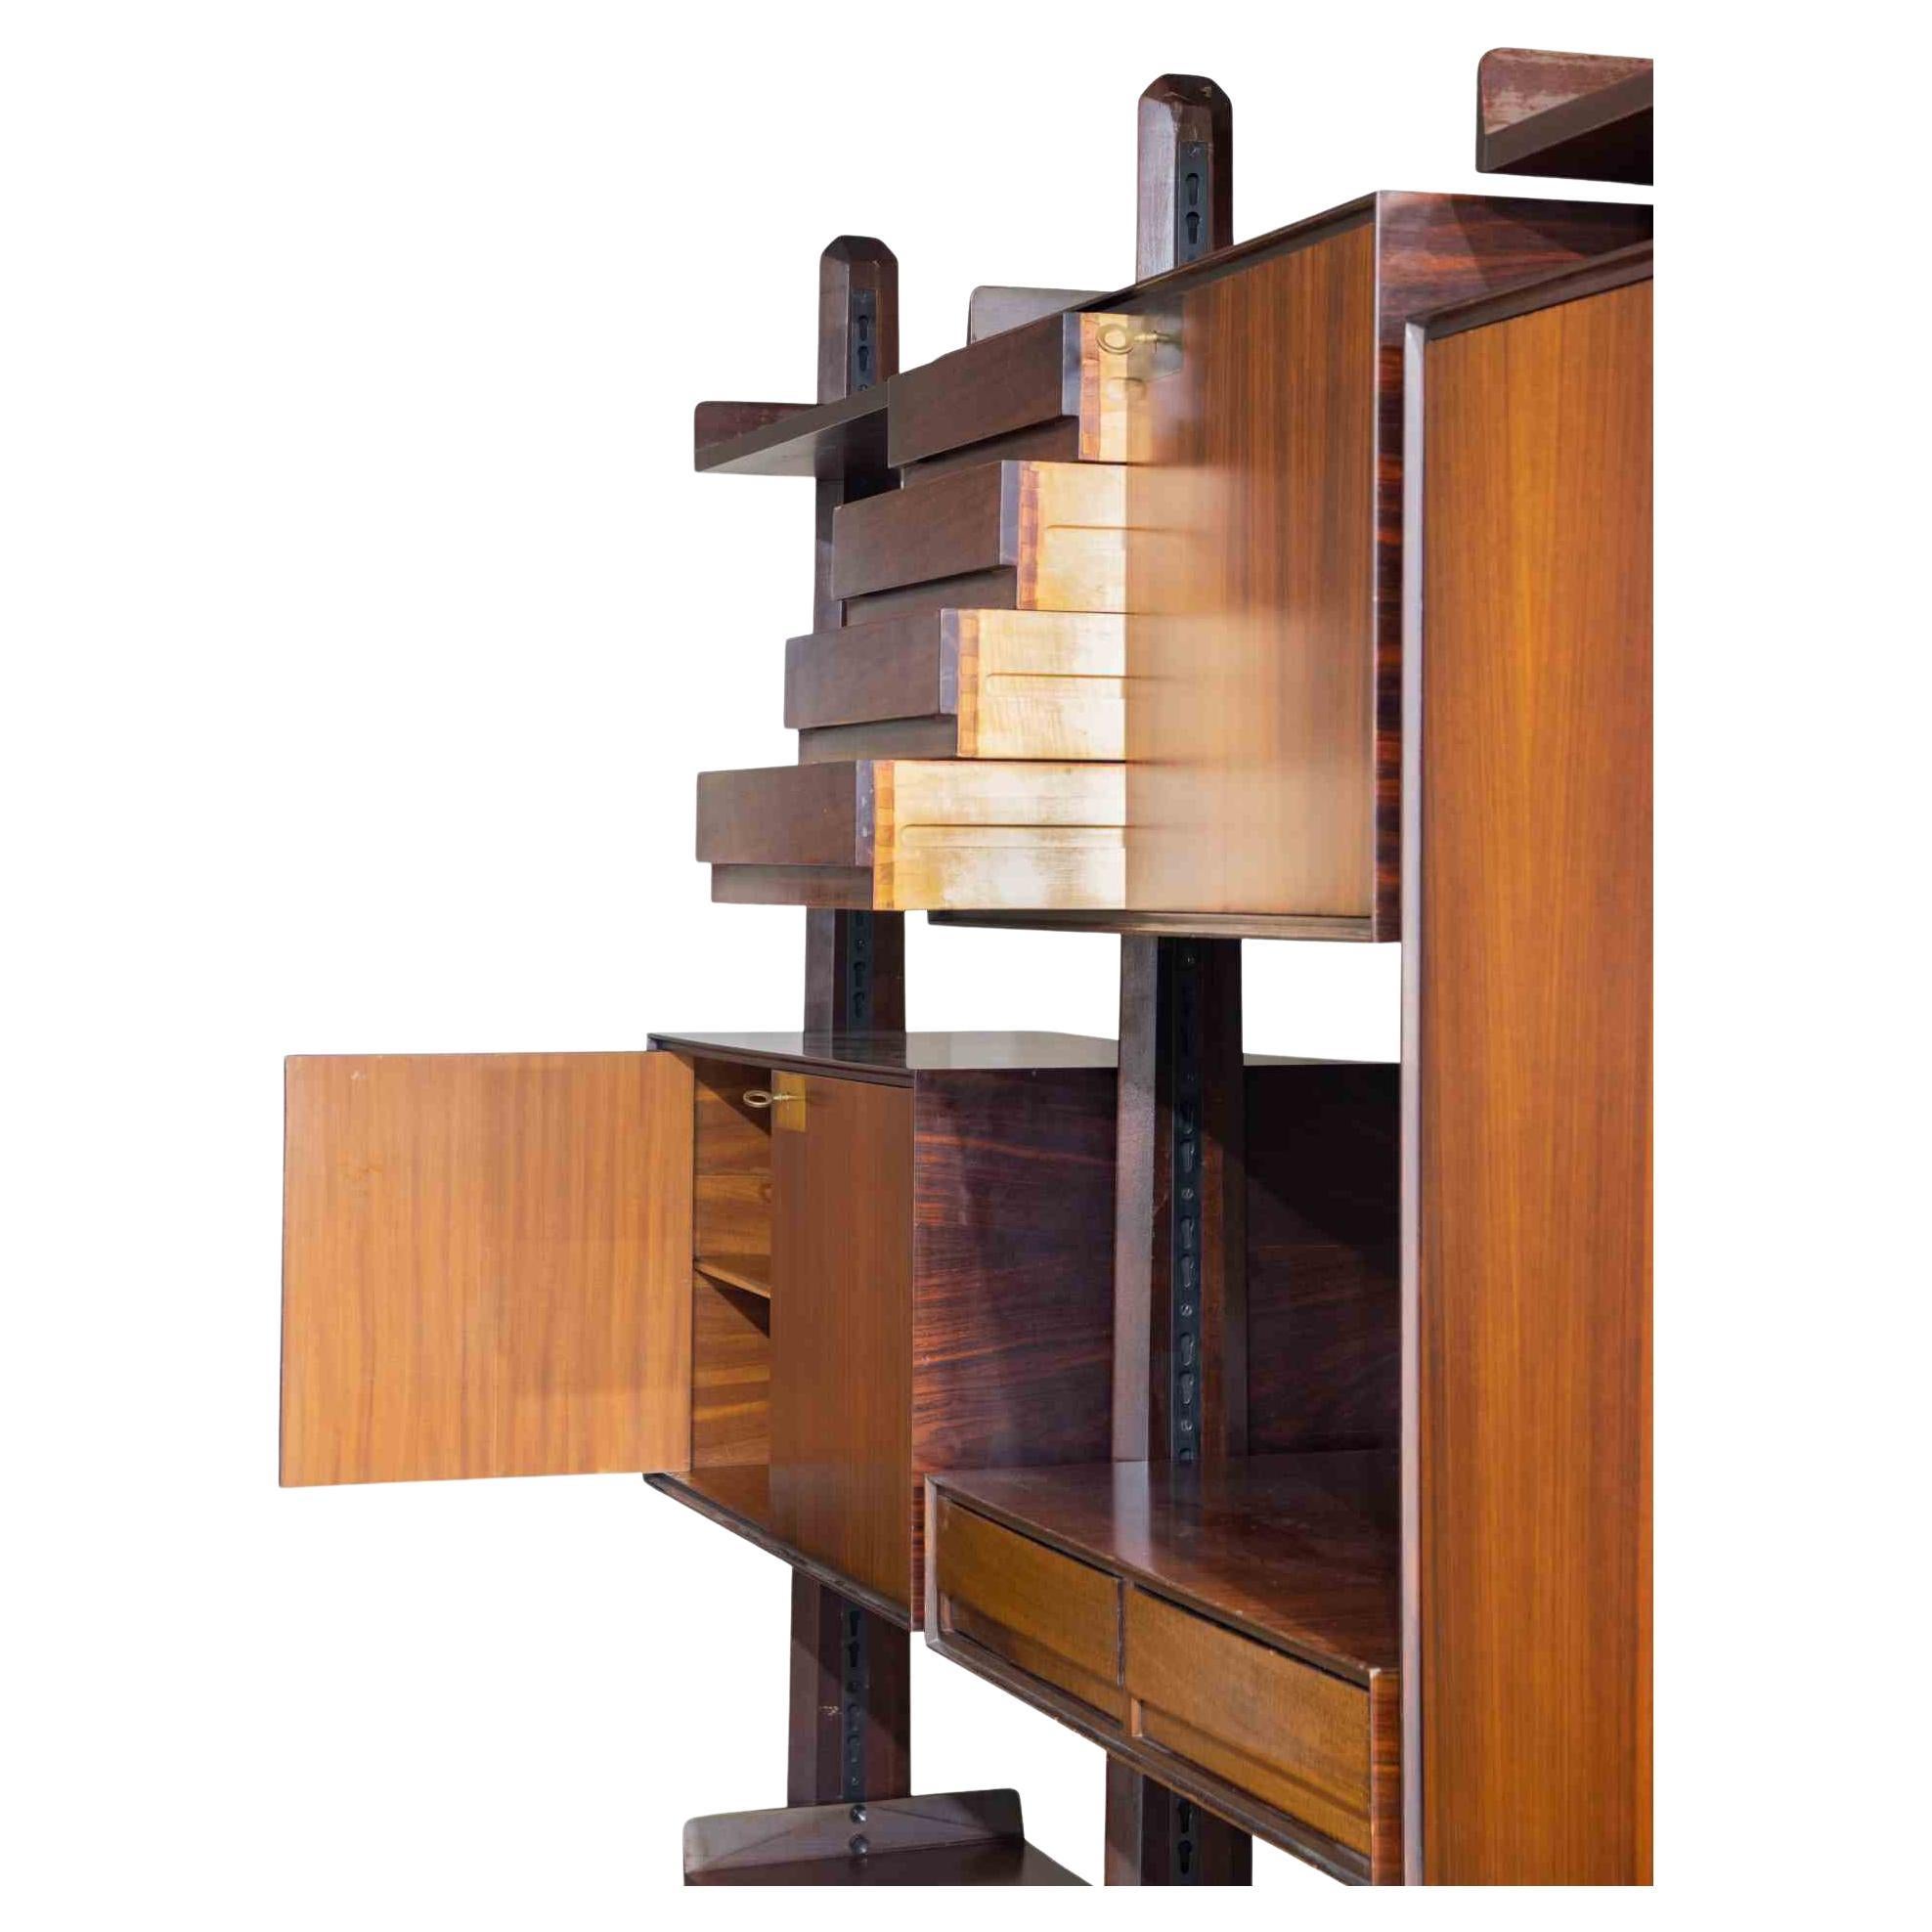 Self standing bookshelf is an original design item realized in the 1970s by Vittorio Dassi.

An elegant wooden bookshelf.

Perfect to decor your home!

The creations of Vittorio Dassi (1893-1973), made in the 1940s and 1950s, are distinguished